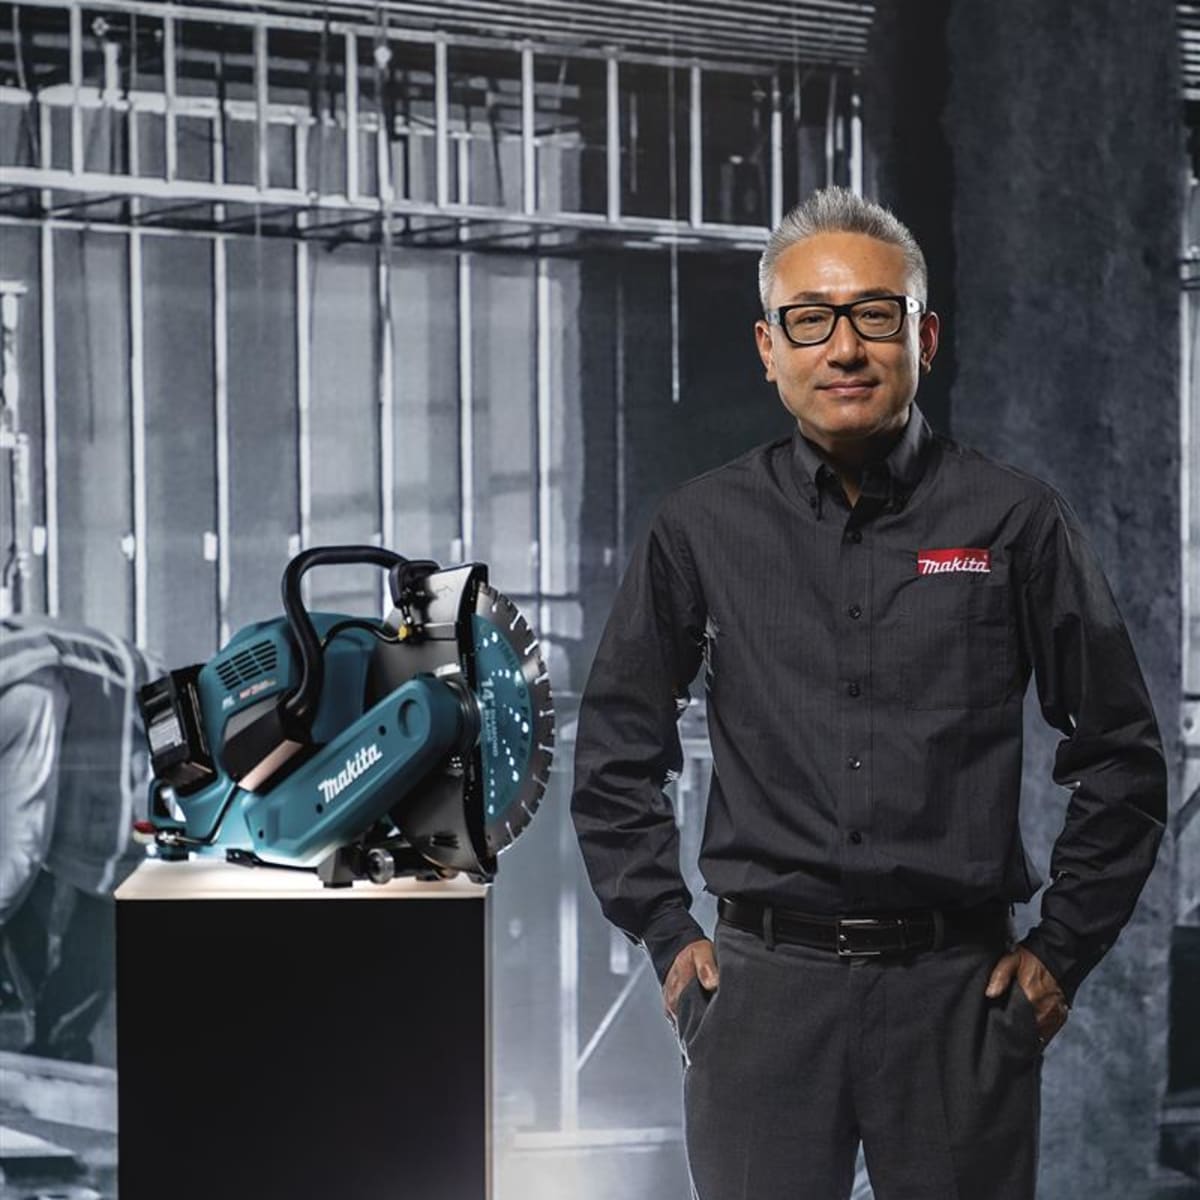 Makita U.S.A. welcomes new President And CEO - Woodshop News